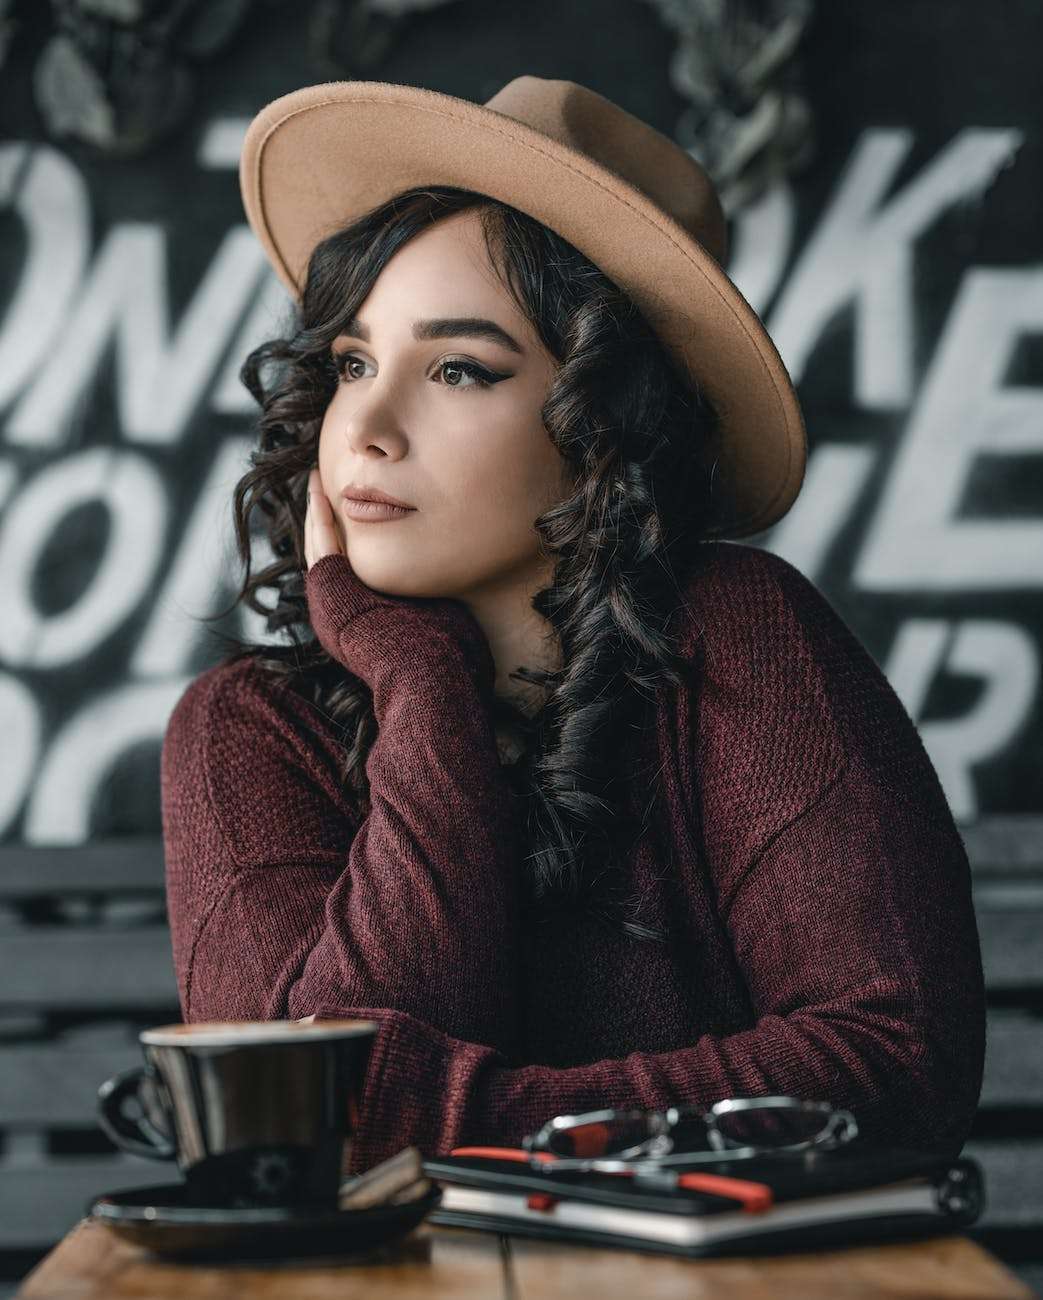 woman wearing brown hat leaning on wooden table